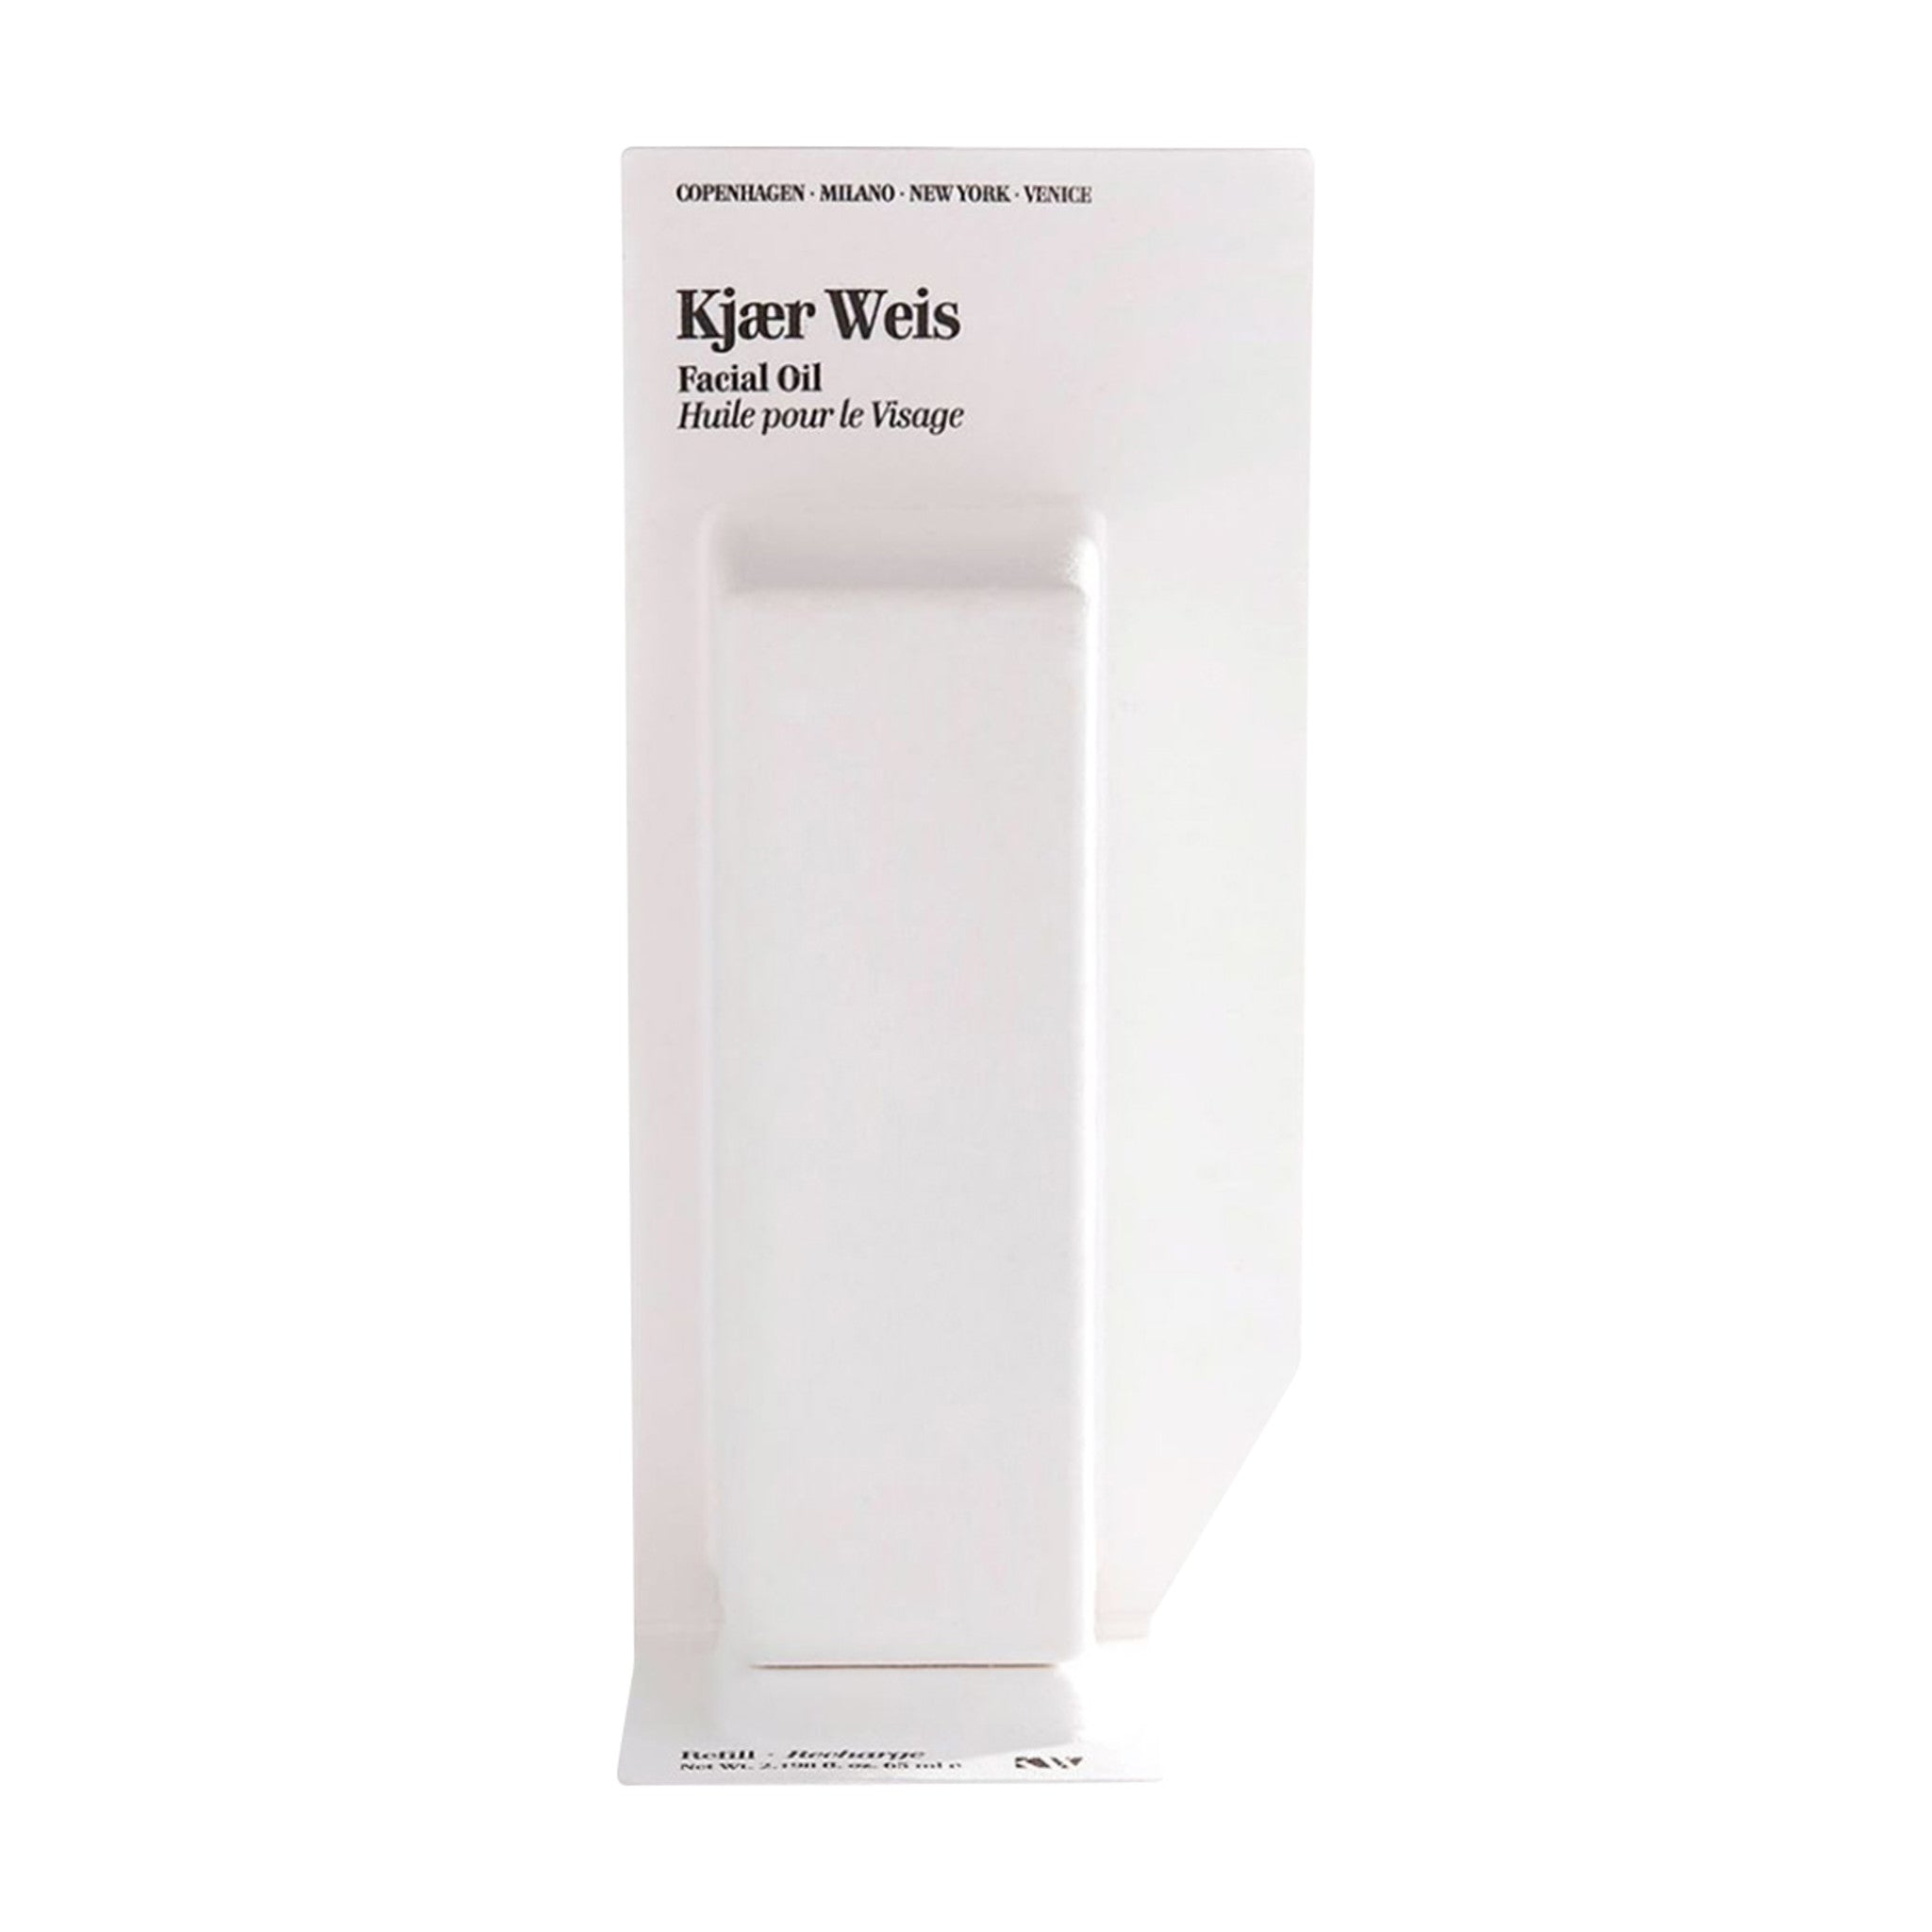 Kjaer Weis The Beautiful Oil Refill Size variant: 30 ml main image.